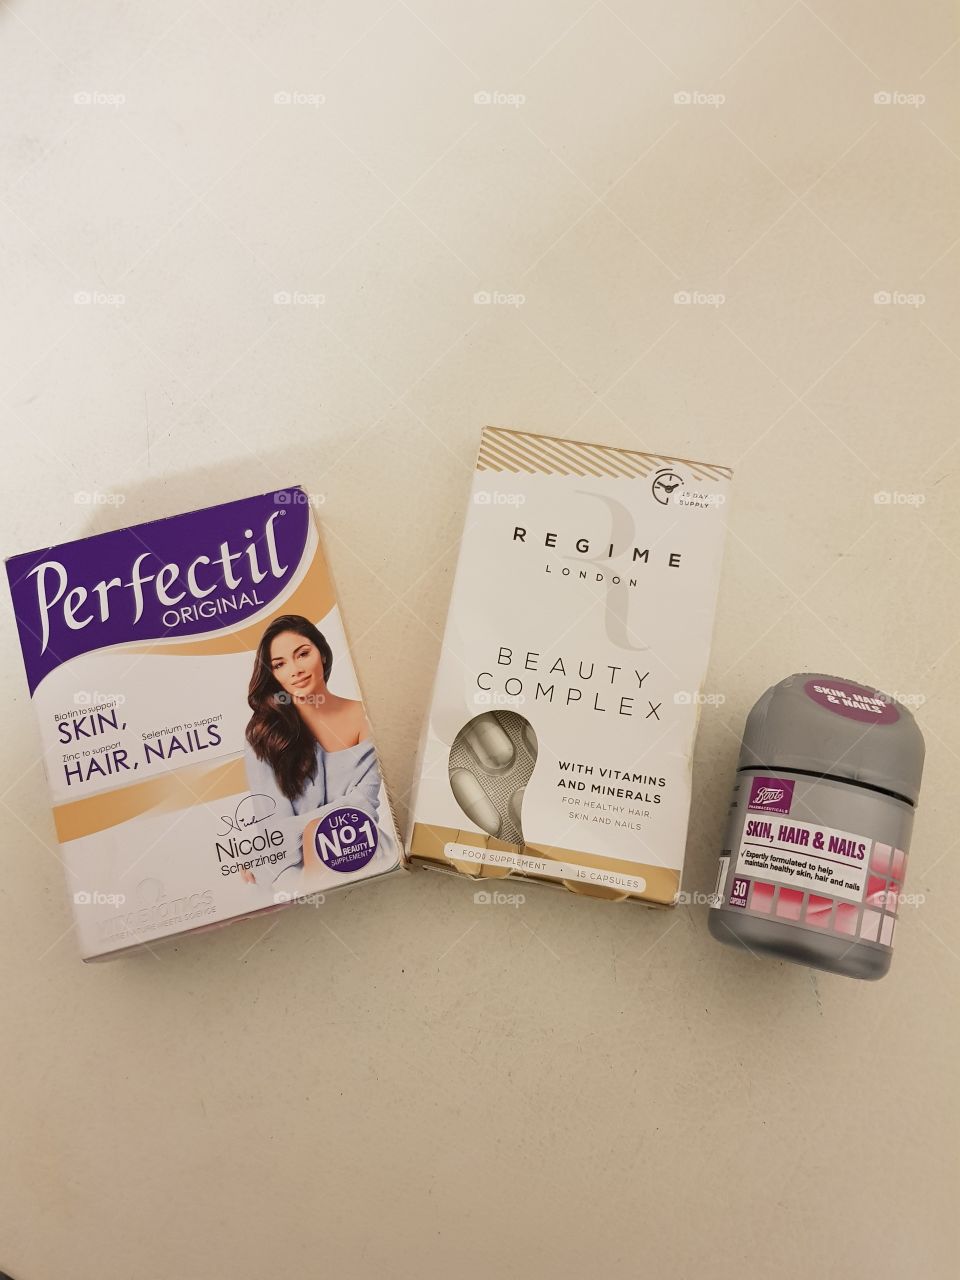 Hair skin and nail vitamins Perfectil Regime and Boots